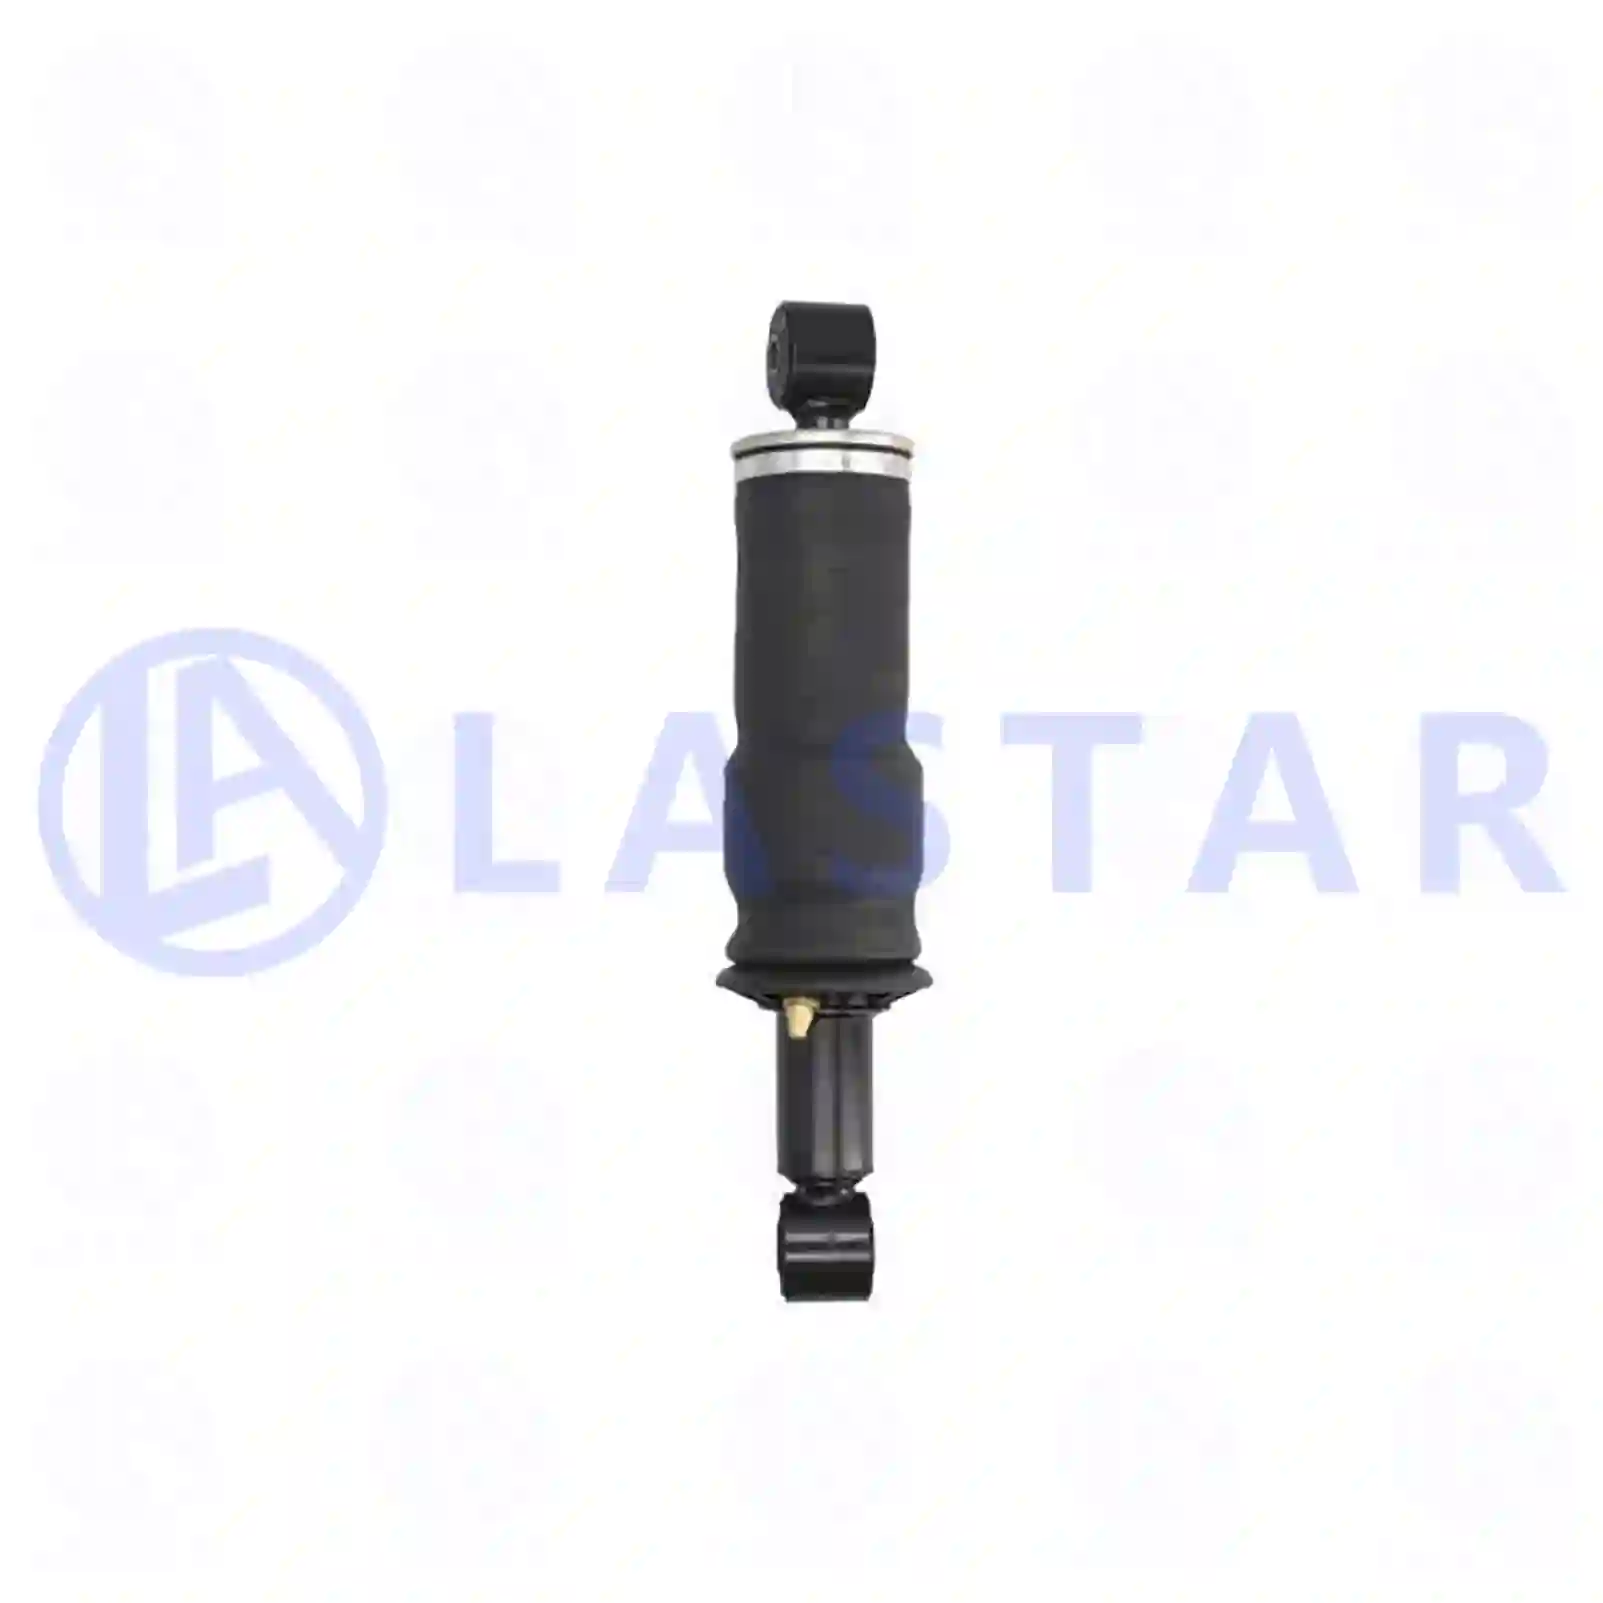 Cabin shock absorber, with air bellow, 77735736, 20721167, 20889138, 21032337, 21651229, 22144209, 3198850, ZG41214-0008 ||  77735736 Lastar Spare Part | Truck Spare Parts, Auotomotive Spare Parts Cabin shock absorber, with air bellow, 77735736, 20721167, 20889138, 21032337, 21651229, 22144209, 3198850, ZG41214-0008 ||  77735736 Lastar Spare Part | Truck Spare Parts, Auotomotive Spare Parts